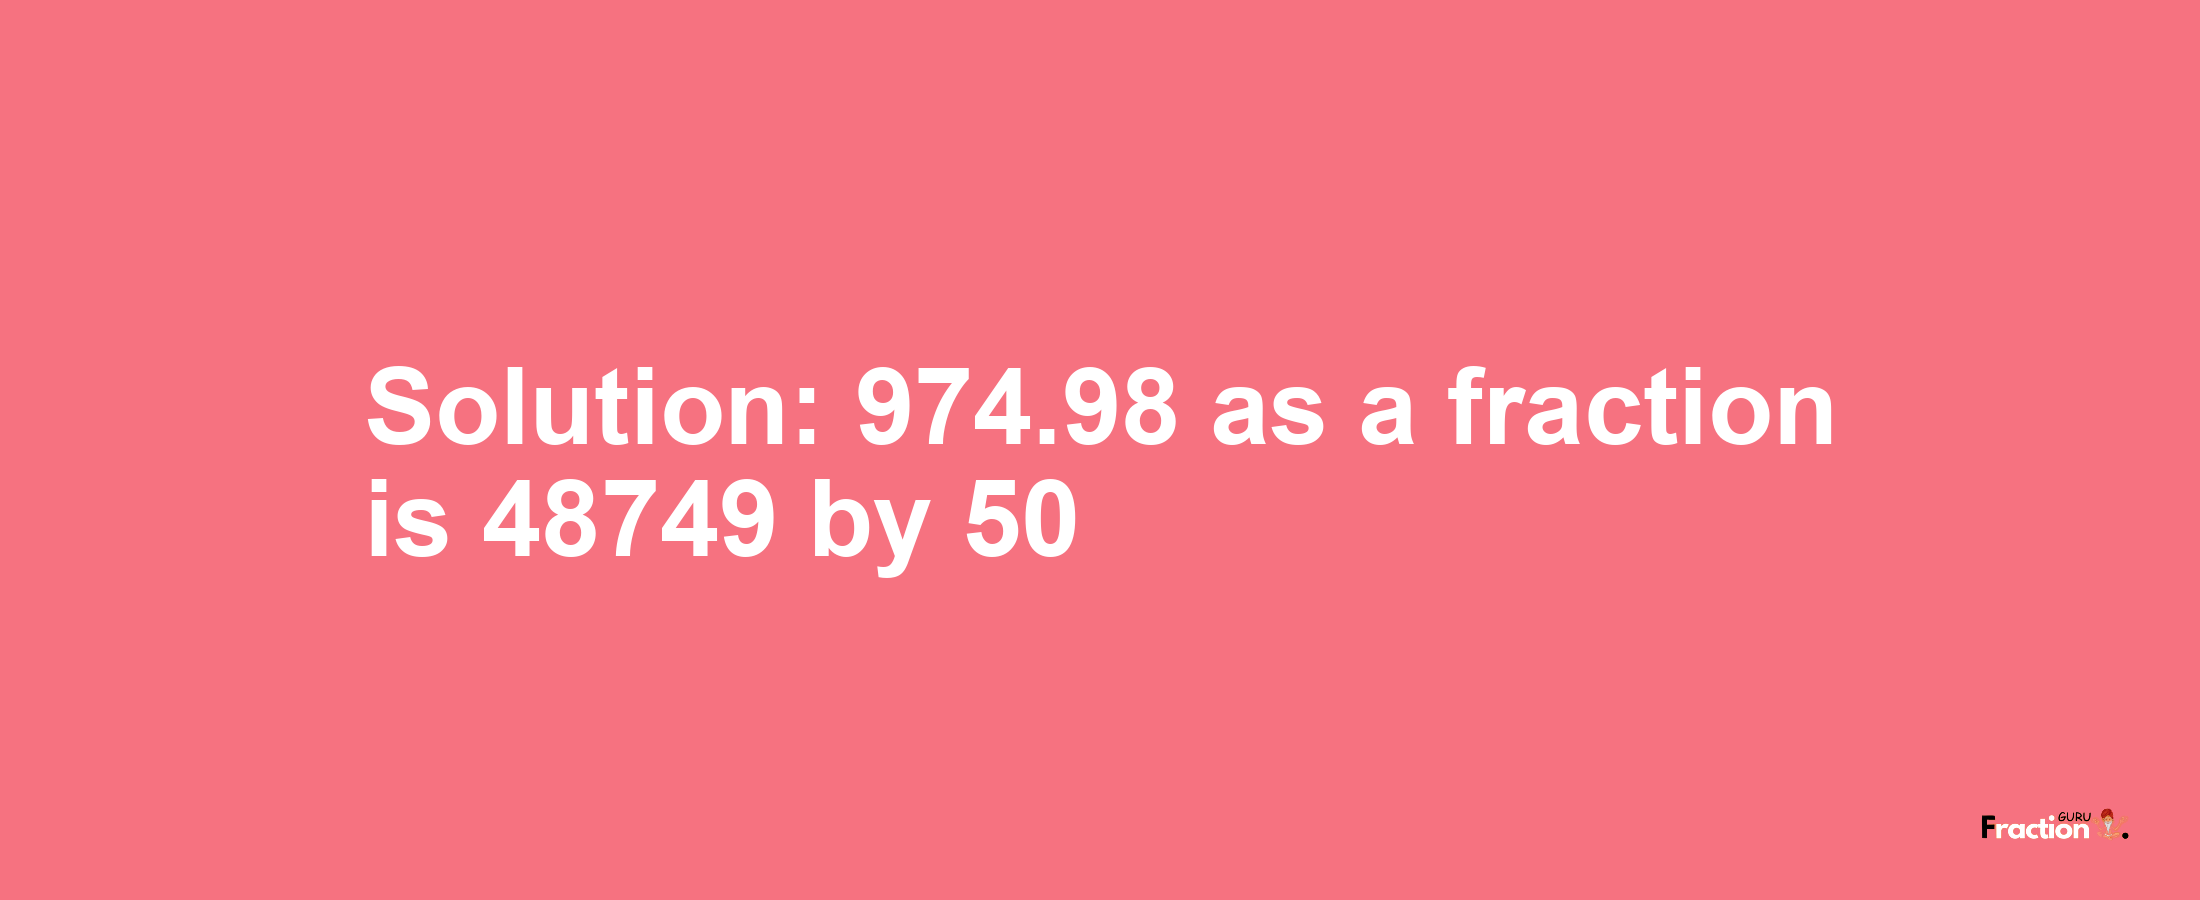 Solution:974.98 as a fraction is 48749/50